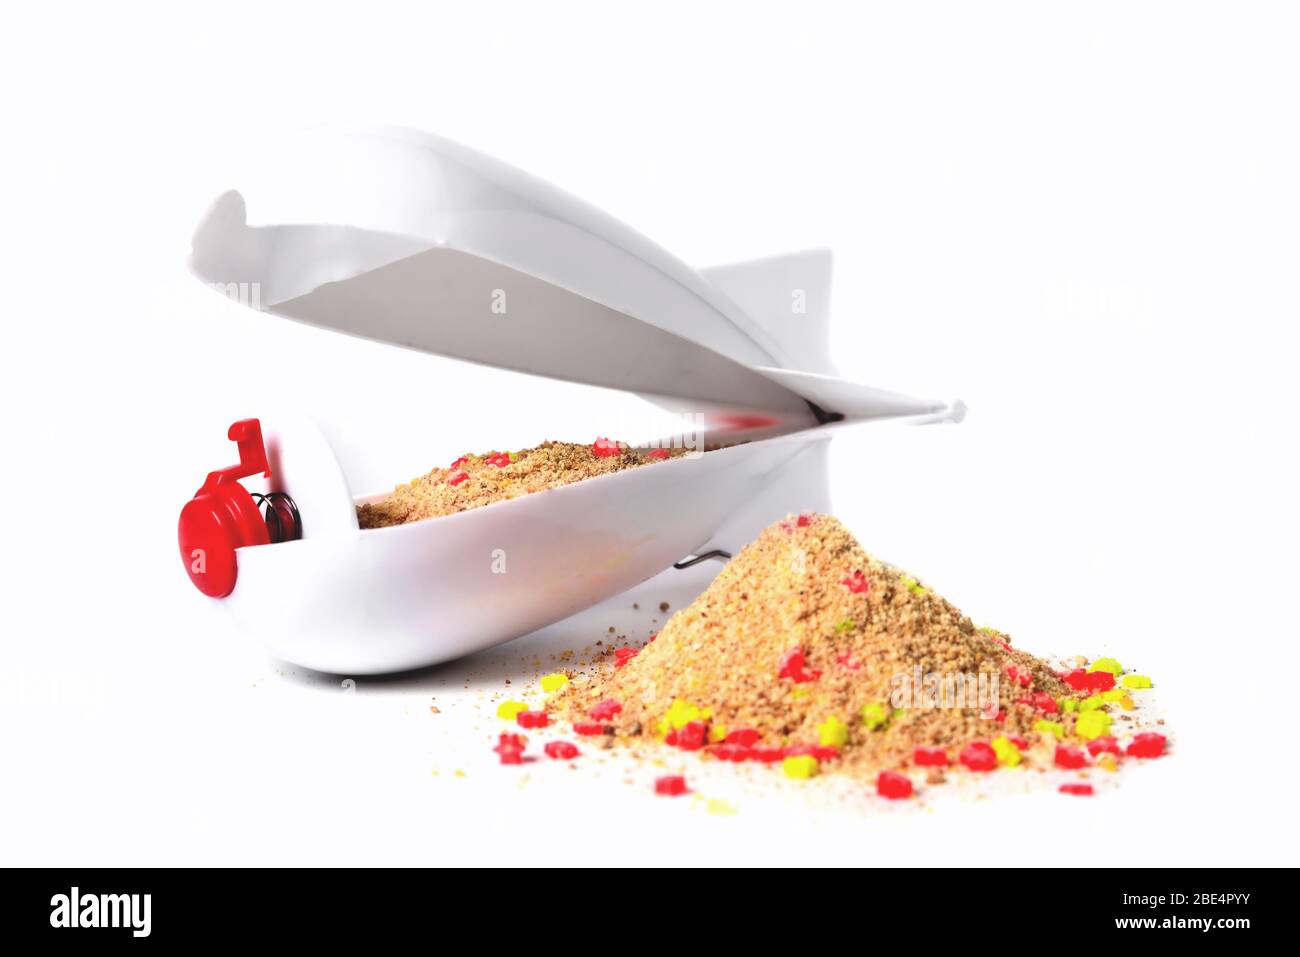 Rocket-type feeder feeder with bait inside, white on a white background, bait slide in the foreground, front view close-up isolate Stock Photo